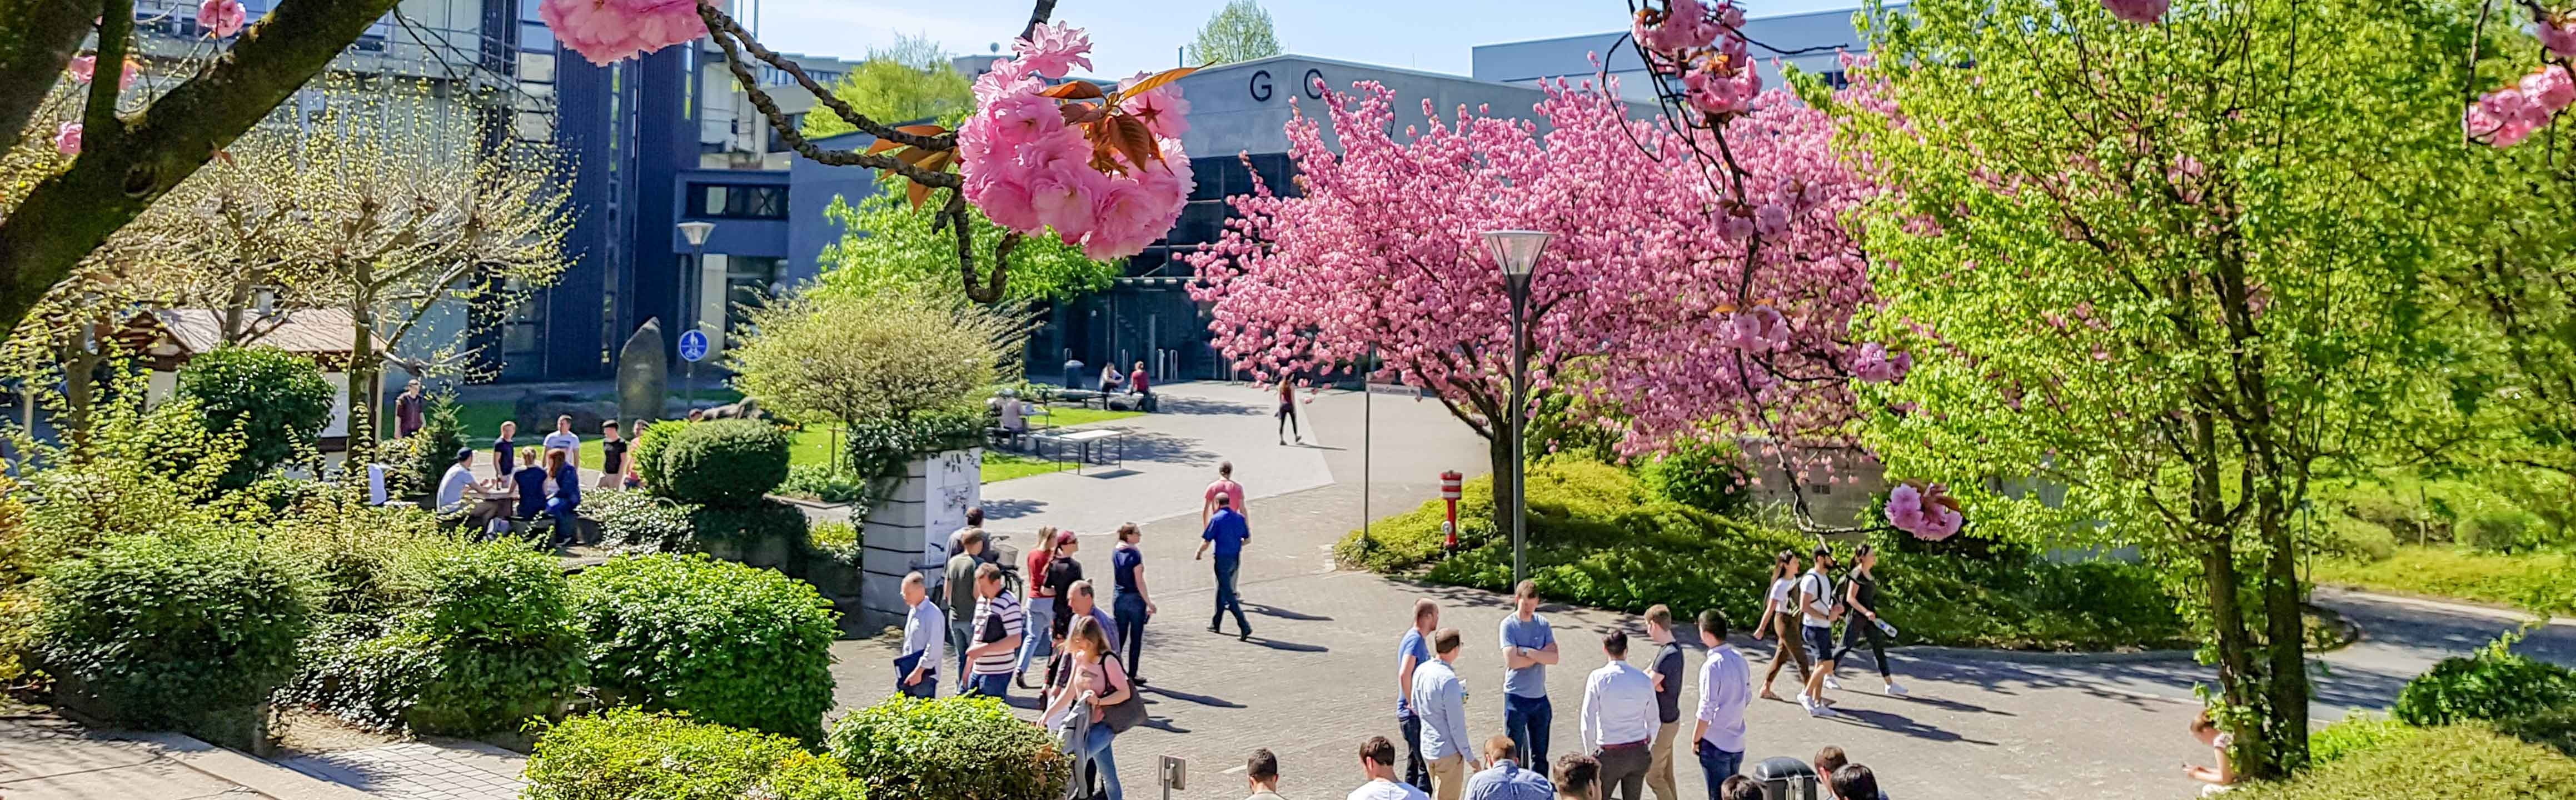 Inner courtyard of the University of Paderborn in spring. Groups of people can be seen.